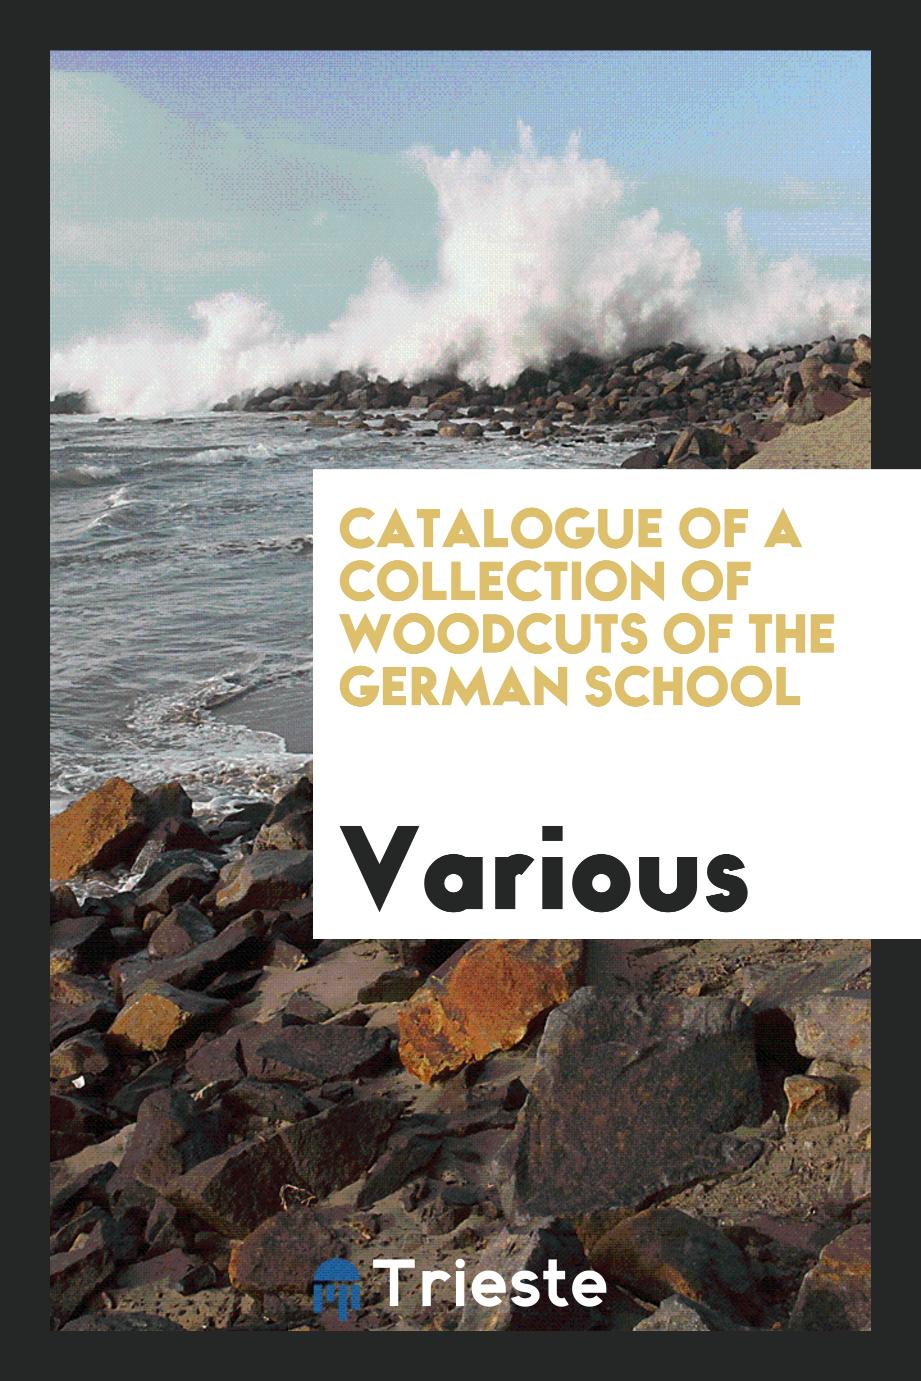 Catalogue of a collection of woodcuts of the German school